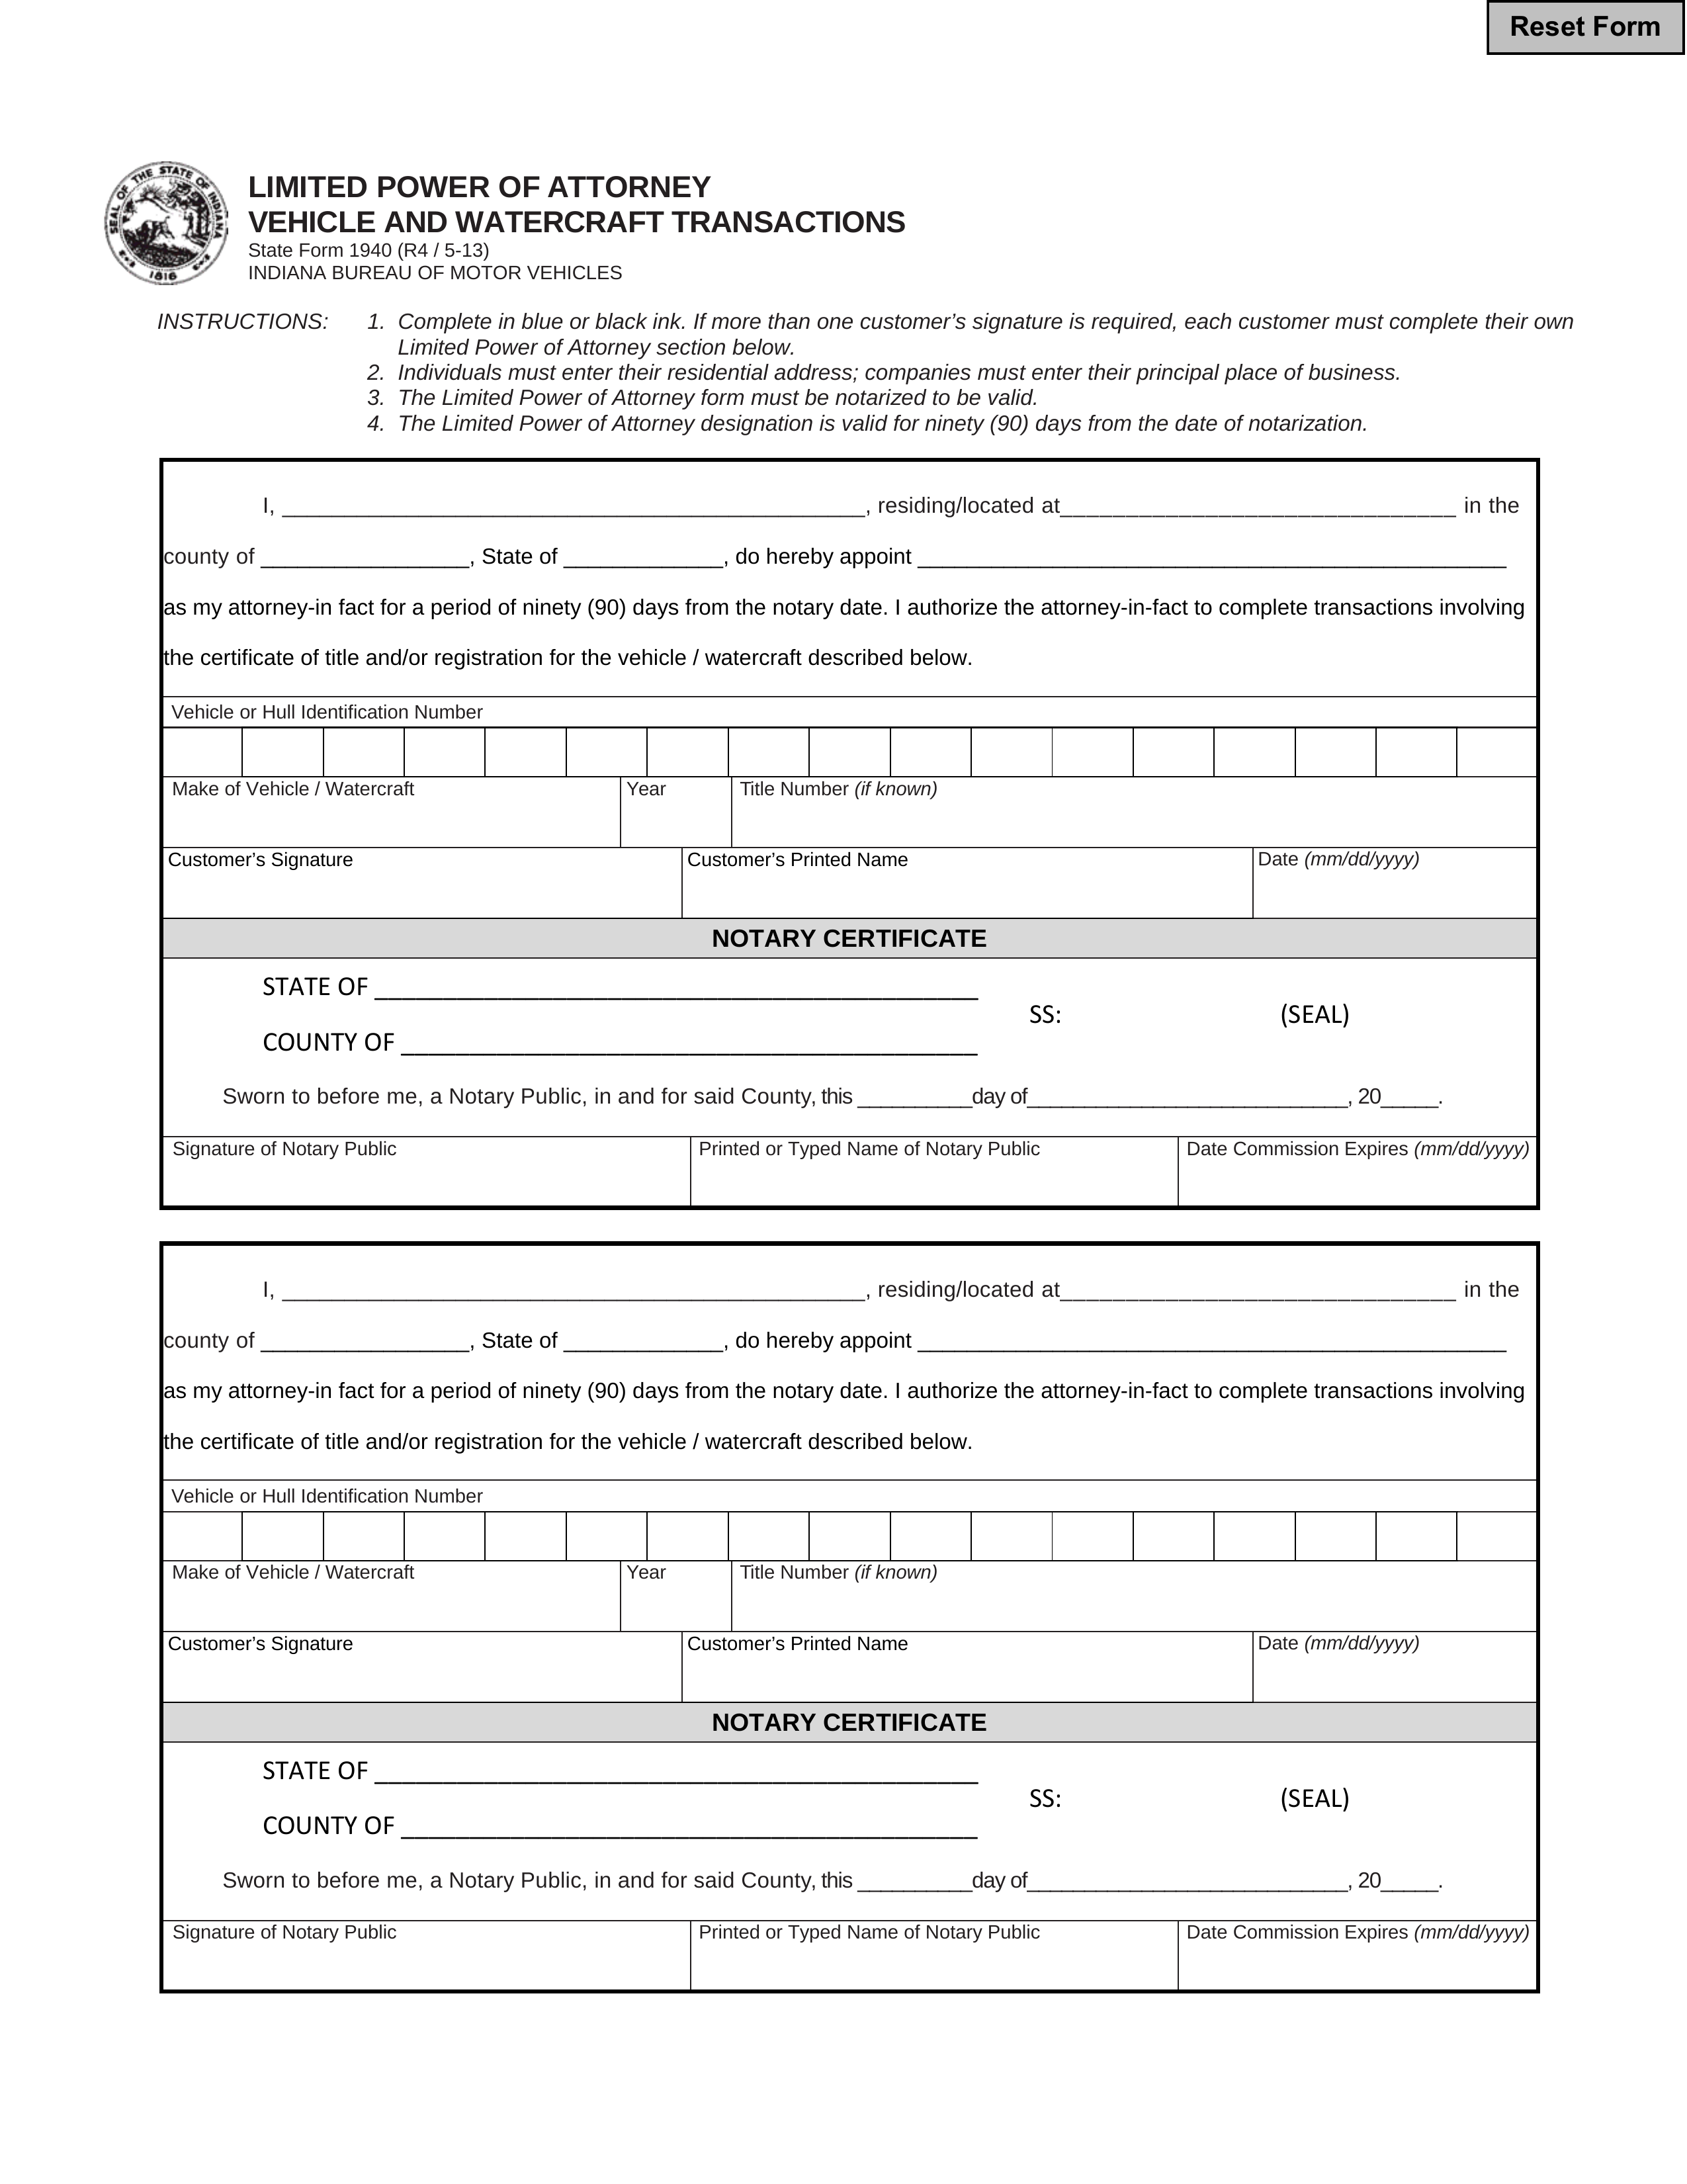 Indiana Motor Vehicle Power of Attorney (Form 01940)